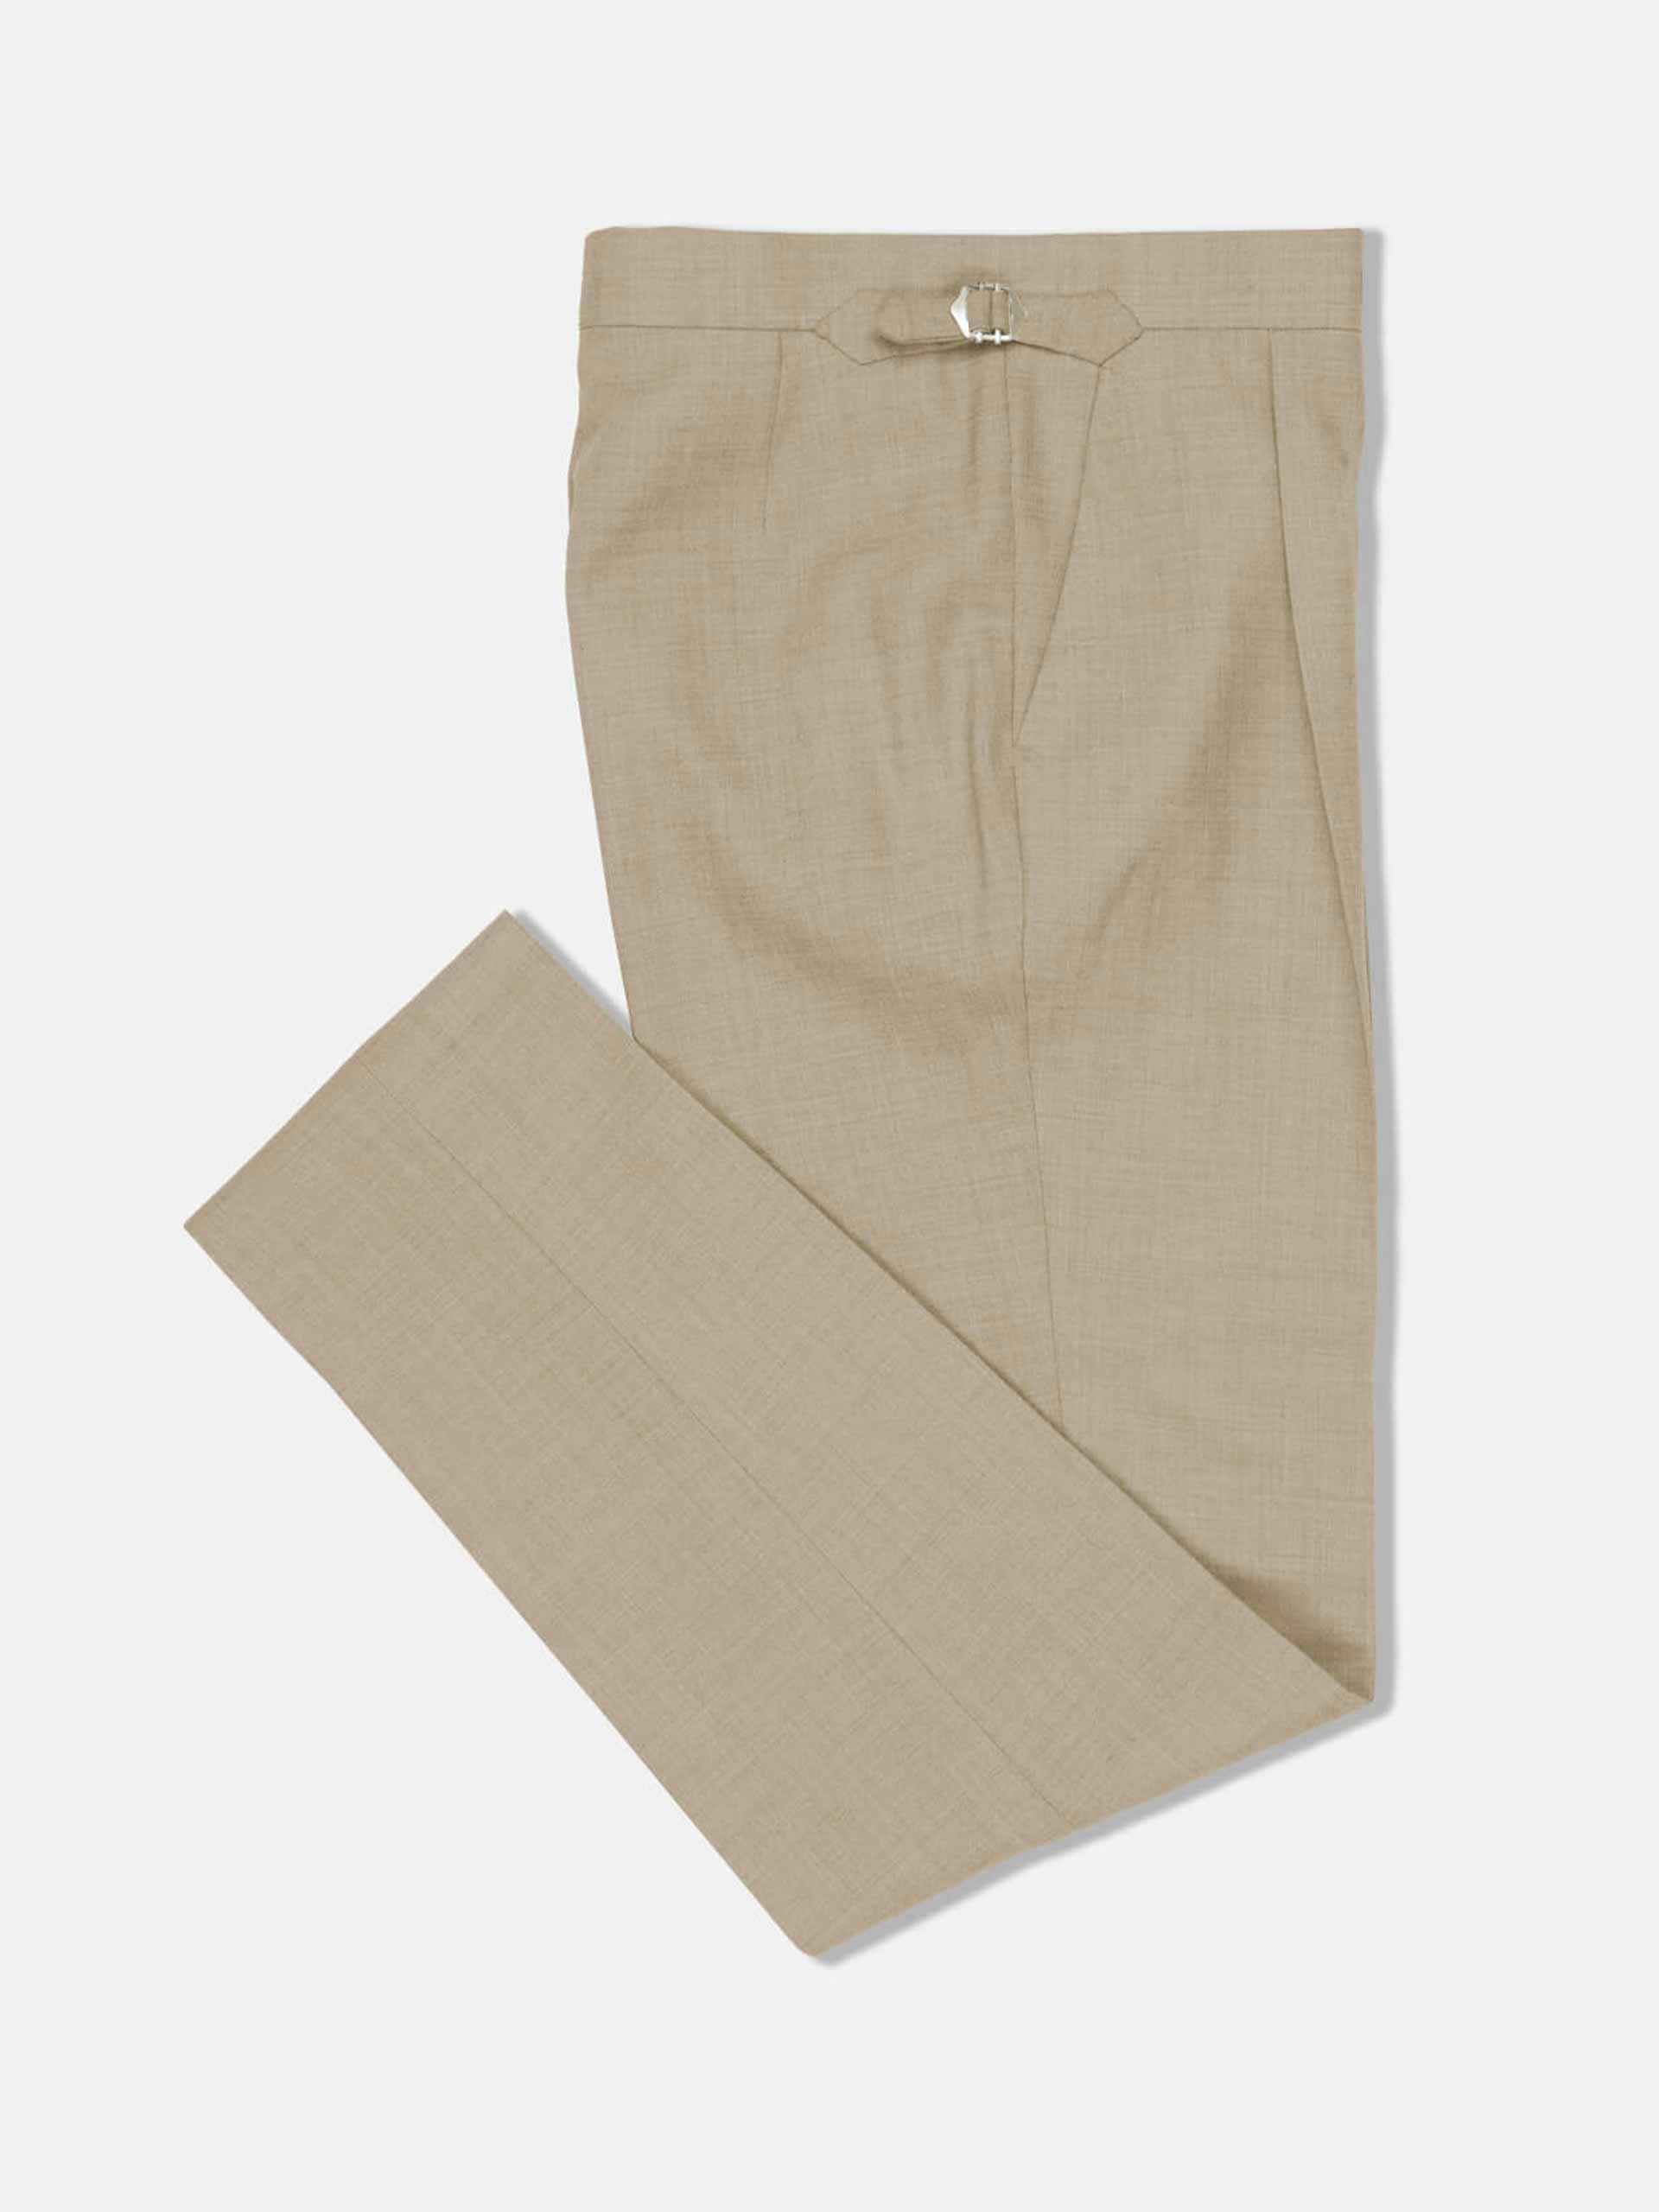 Pleat front trousers